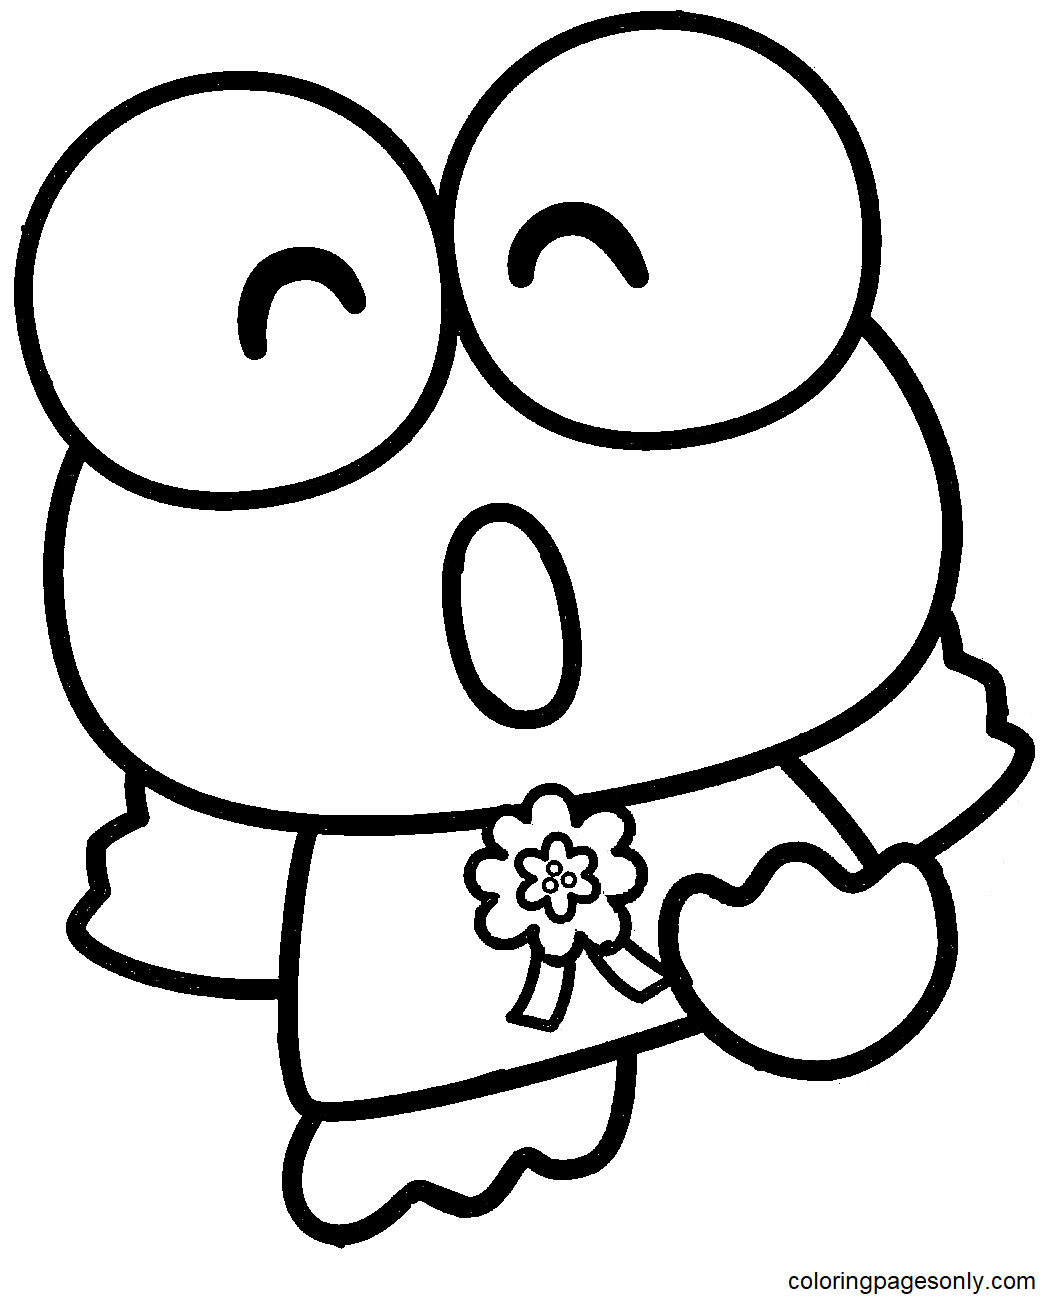 Funny Keroppi Coloring Pages